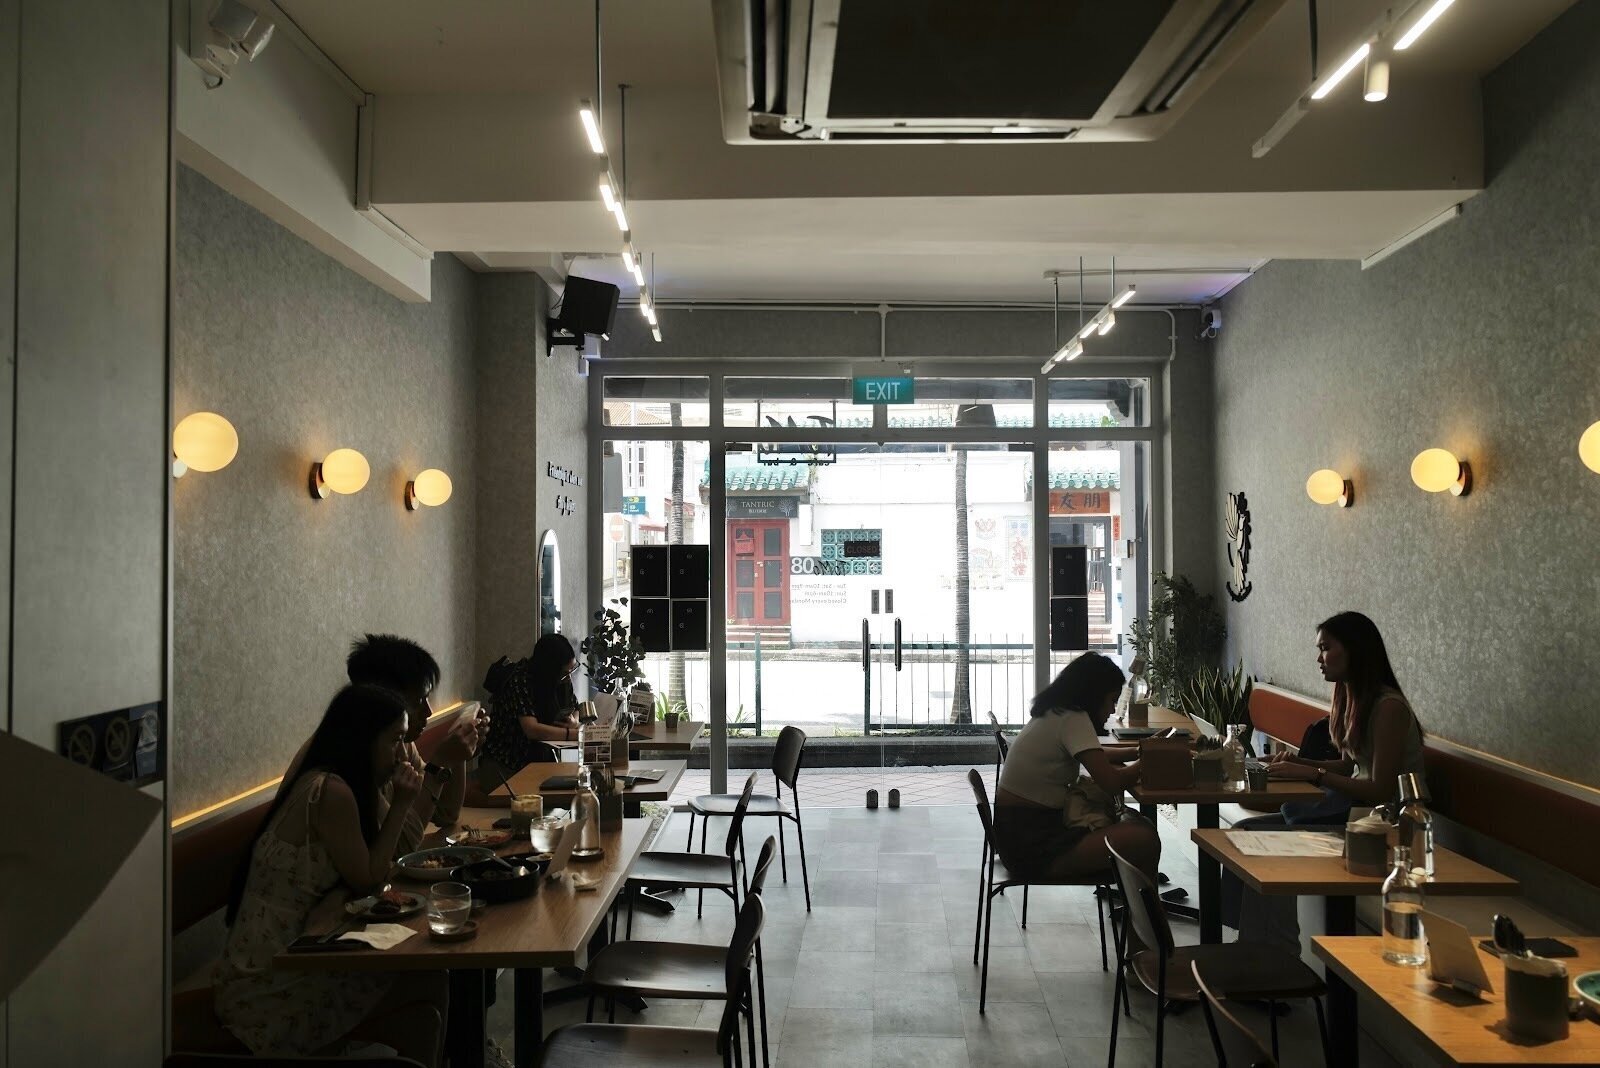 <span class="translation_missing" title="translation missing: en.meta.location_title, location_name: ToMo Cafe (Neil Road), city: Singapore">Location Title</span>